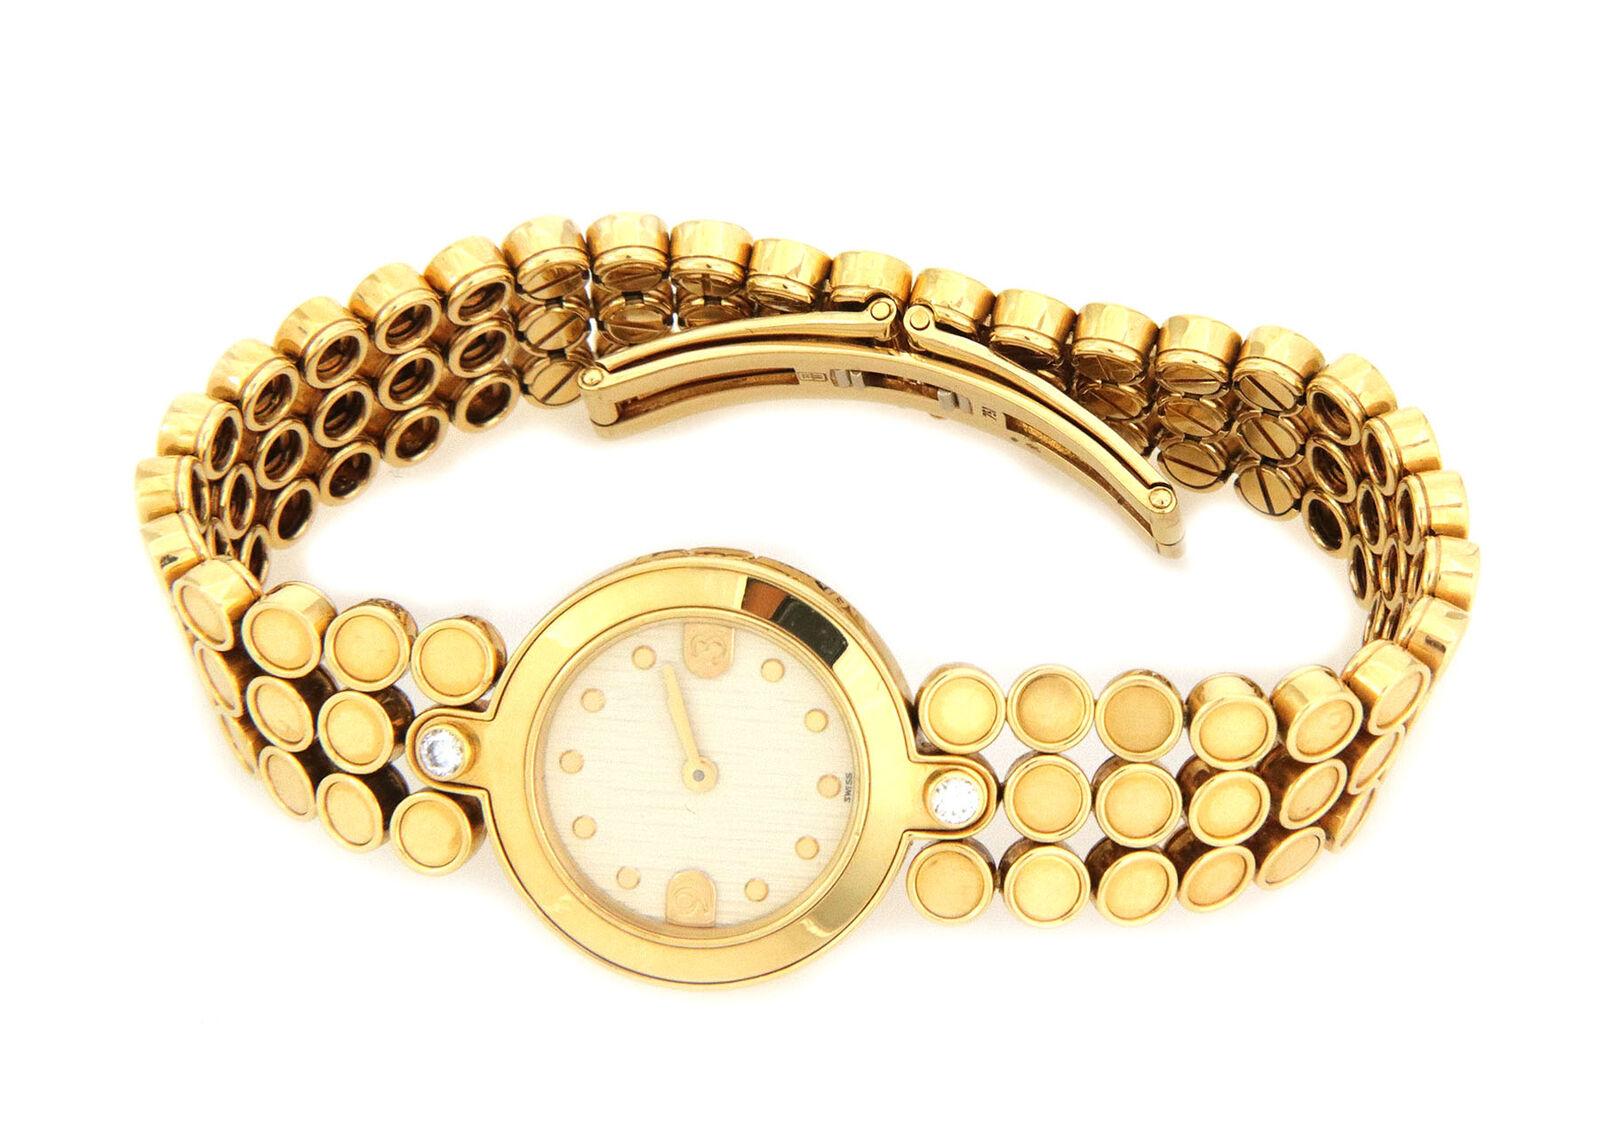 This is a gorgeous authentic women's watch by Harry Winston, crafted from 18k yellow gold featuring a round face watch, battery quartz Swiss Made with sapphire crystal top, champagne color face with gold dot hour markers. The single lug each is